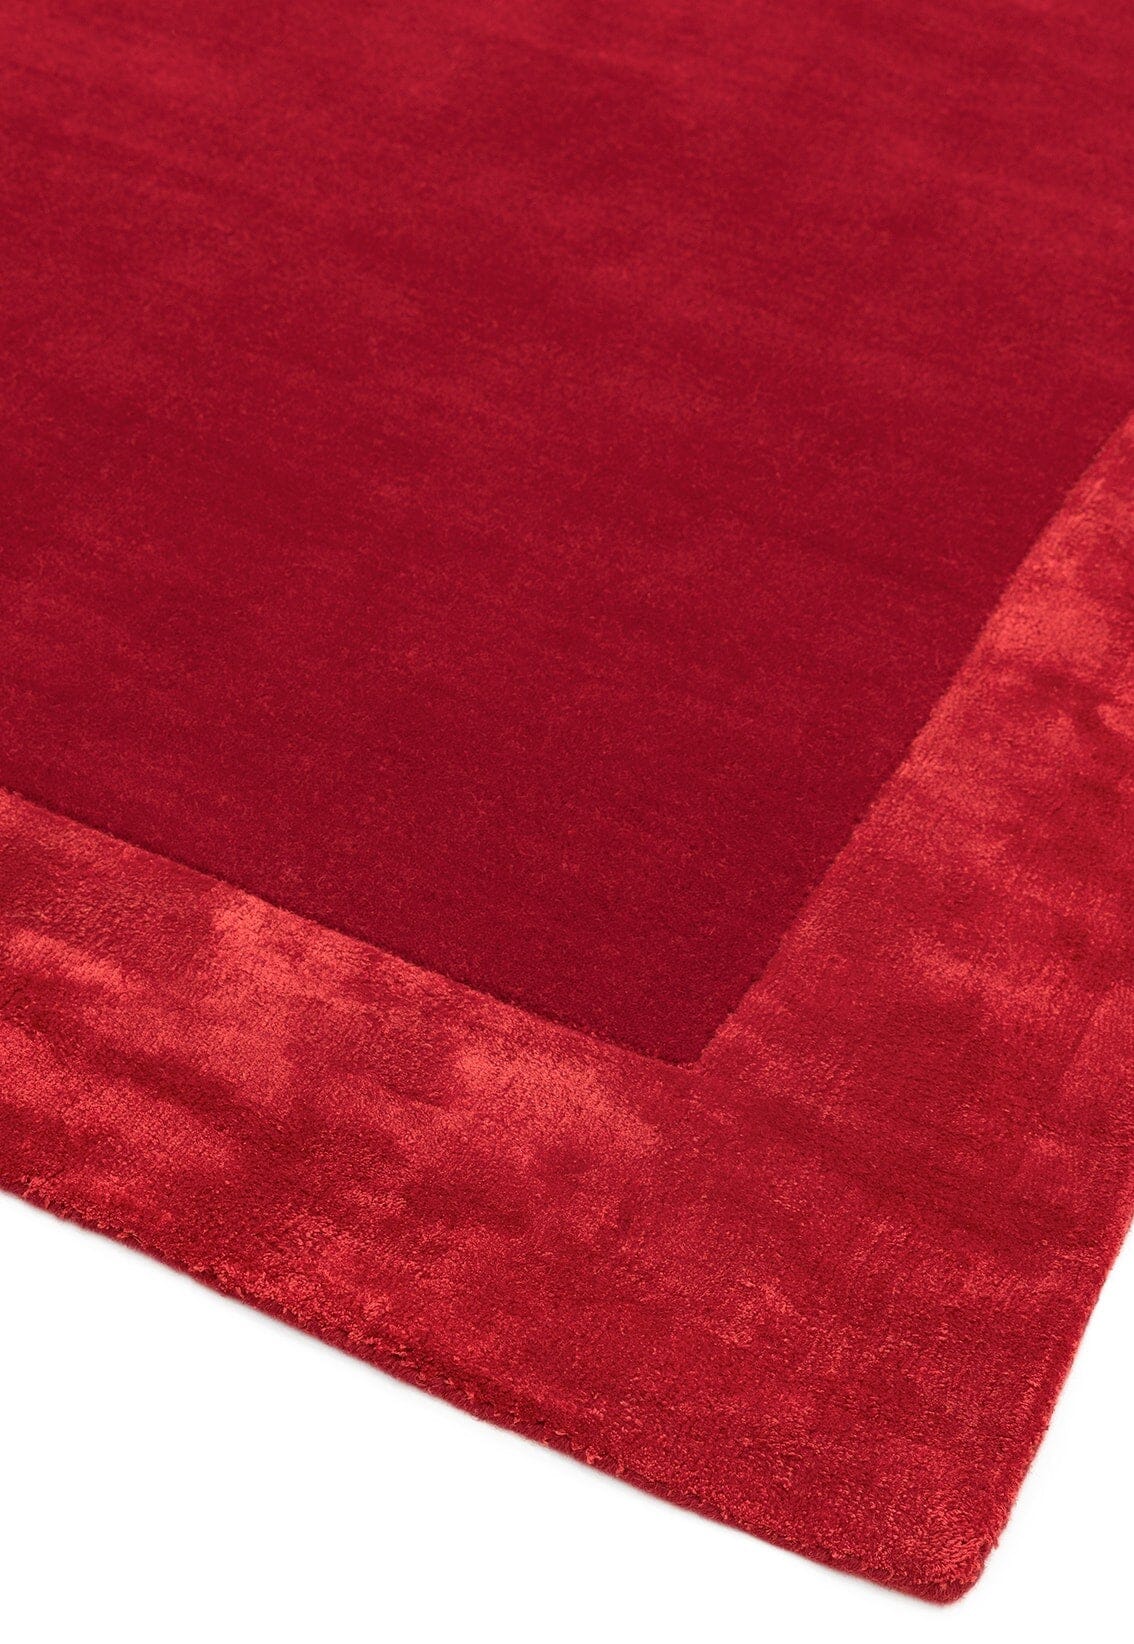 Asiatic Carpets Ascot Hand Woven Rug Red - 160 x 230cm